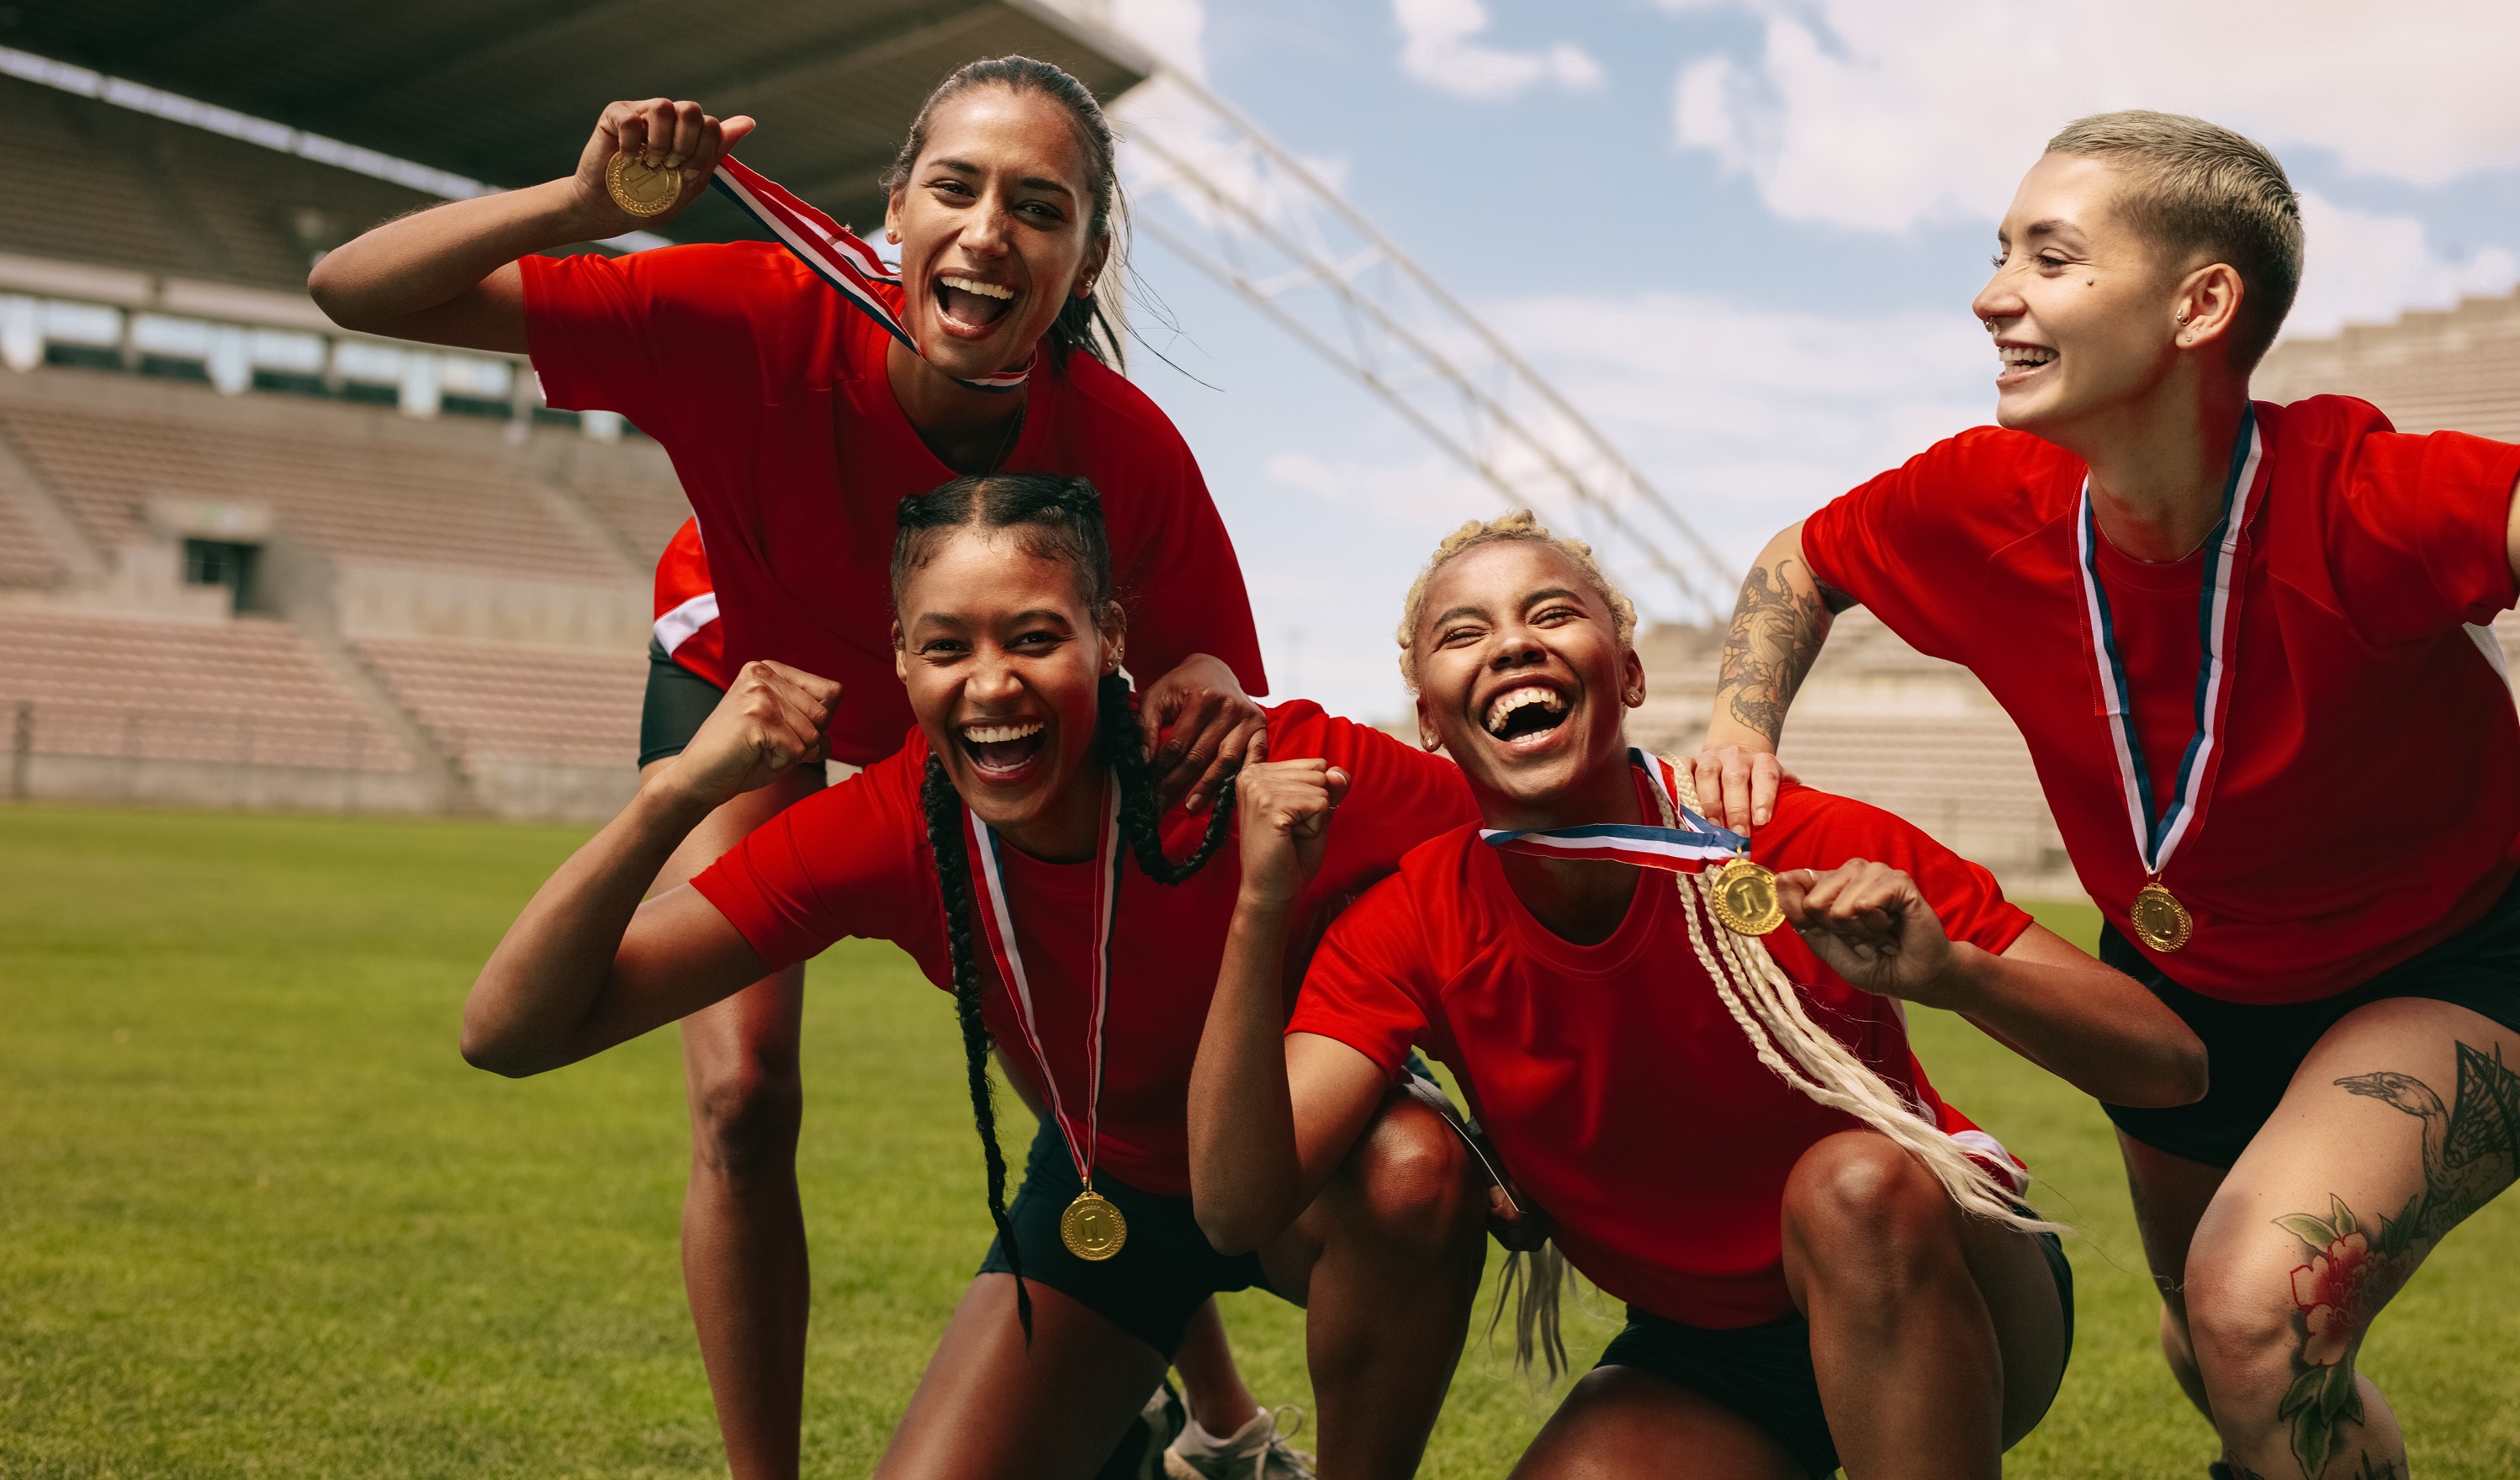 Four Smiling Female Athletes in Red Shirts and Black Shorts Standing on a Soccer Field with Medals Around their Necks